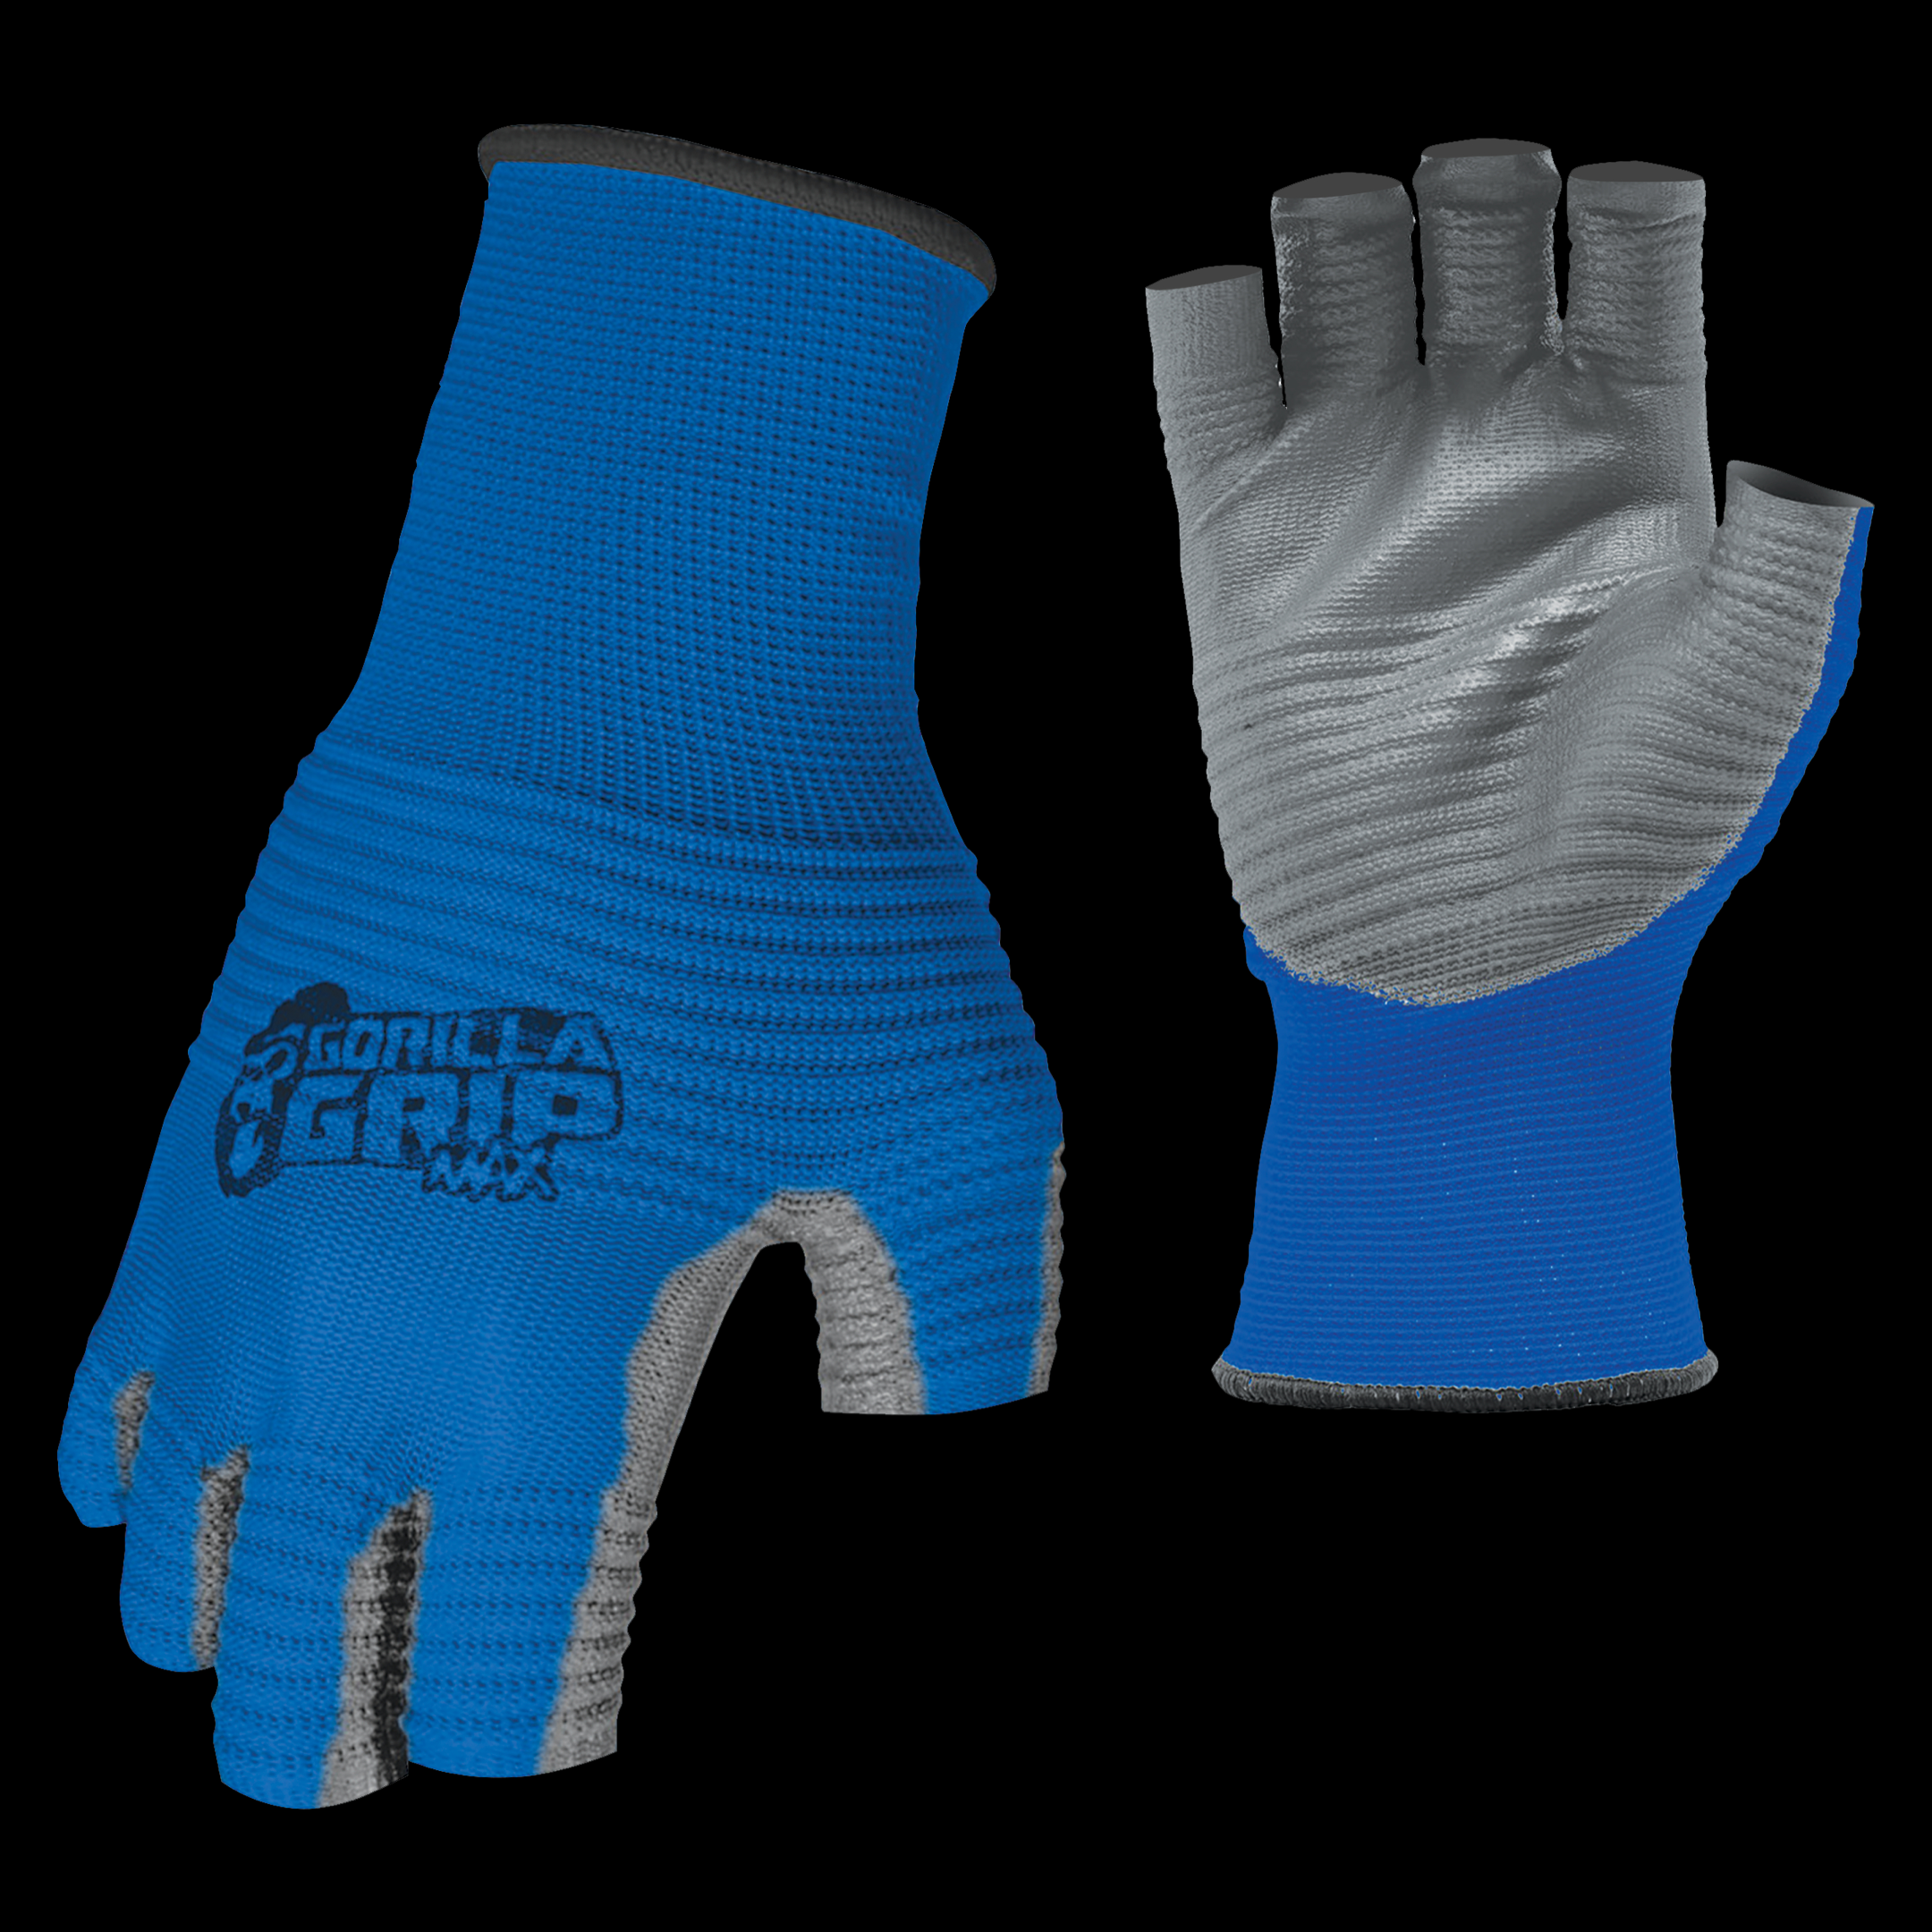  Gorilla Grip MAX Fingerless Gloves, Breathable Fingerless  Work and Fishing Gloves with Ribbed Gripping Surface, Color: Blue and  Black